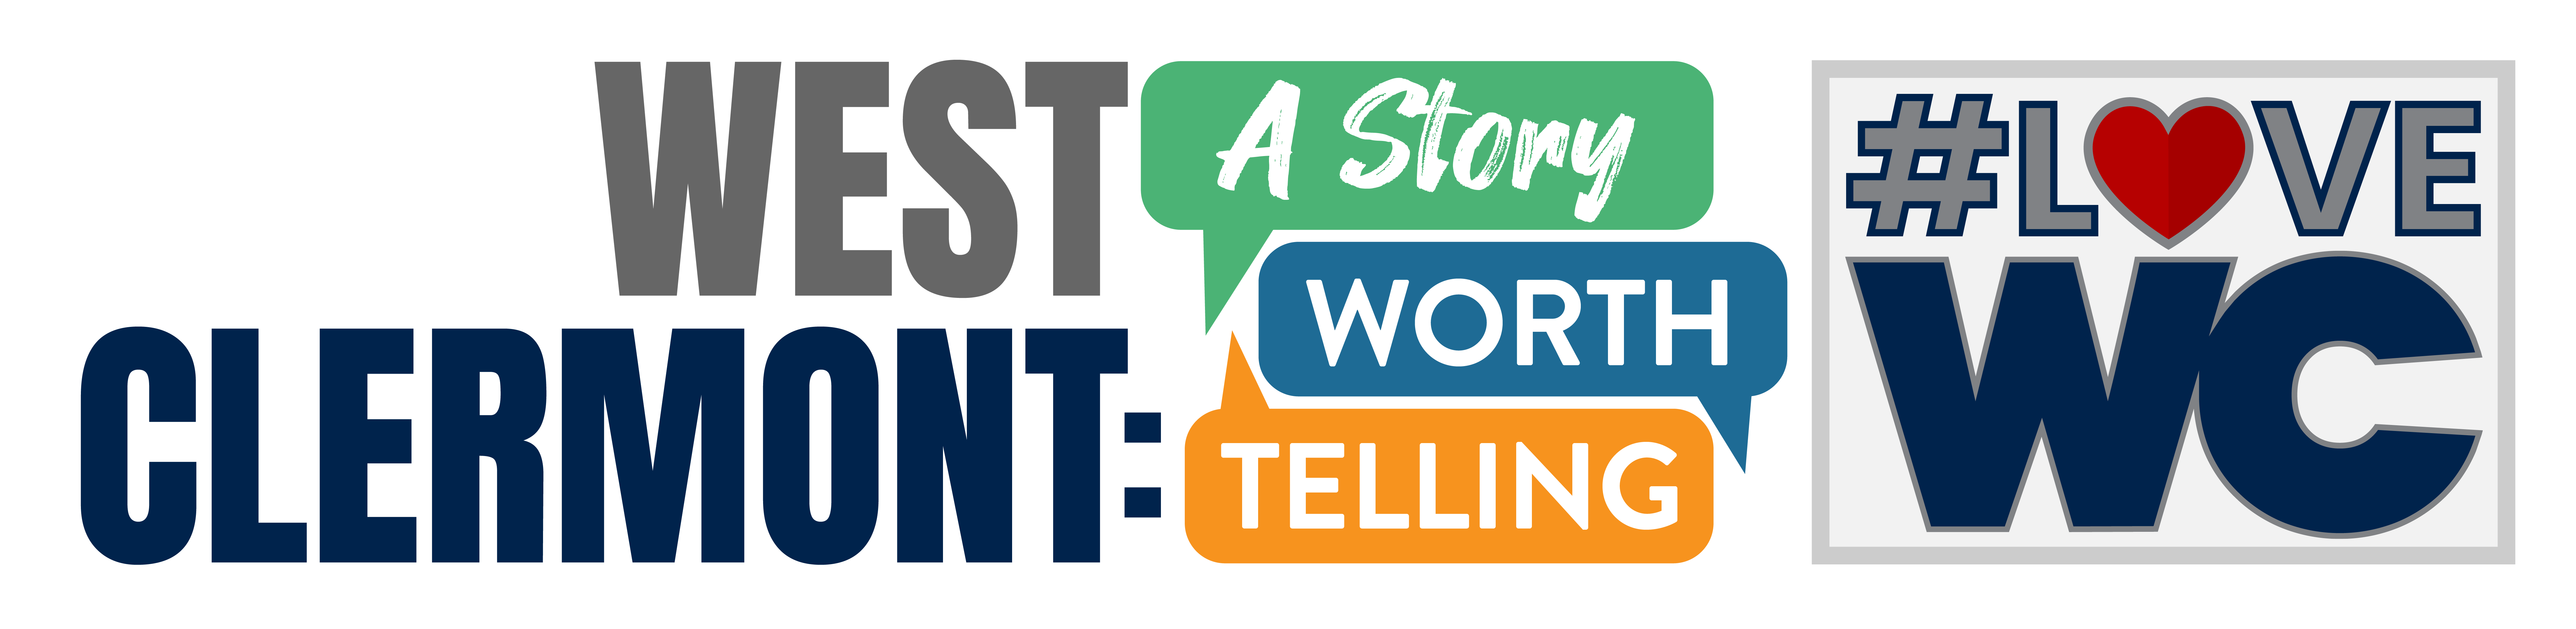 Logo with text, "West Clermont: A Story Worth Telling" and "#Love WC"